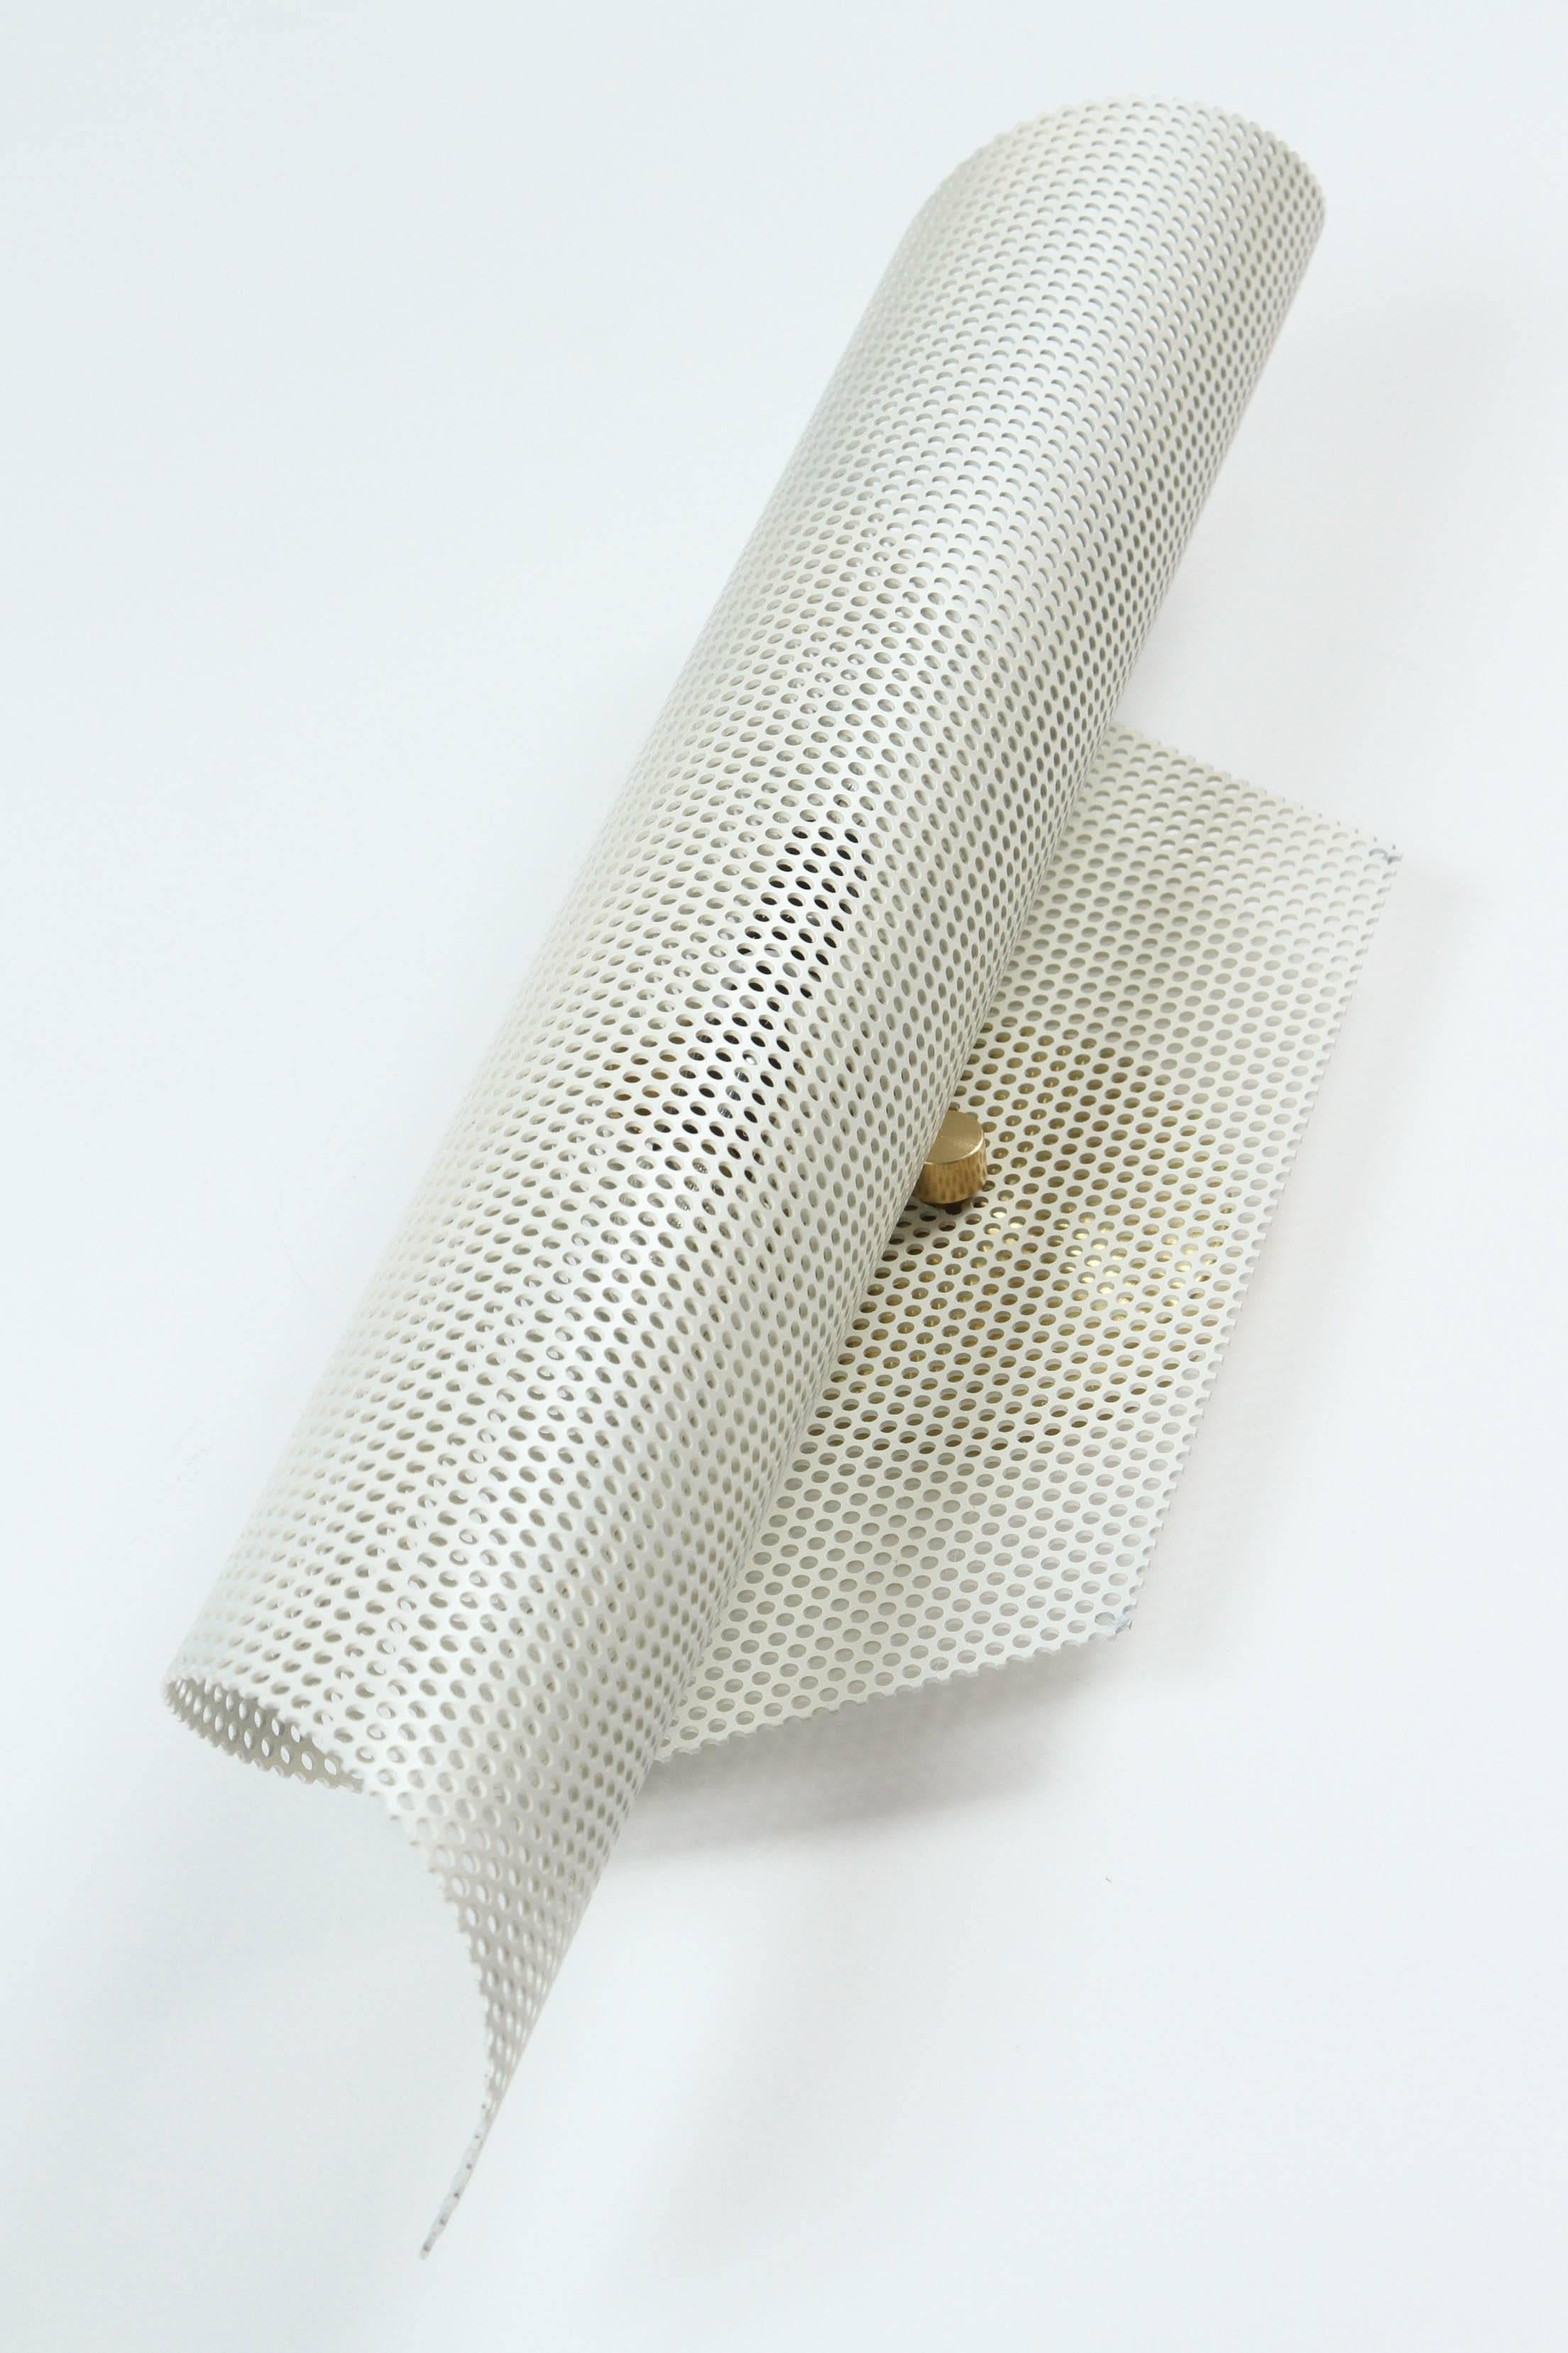 Contemporary Rolled Perforated Sconce by Lawson-Fenning